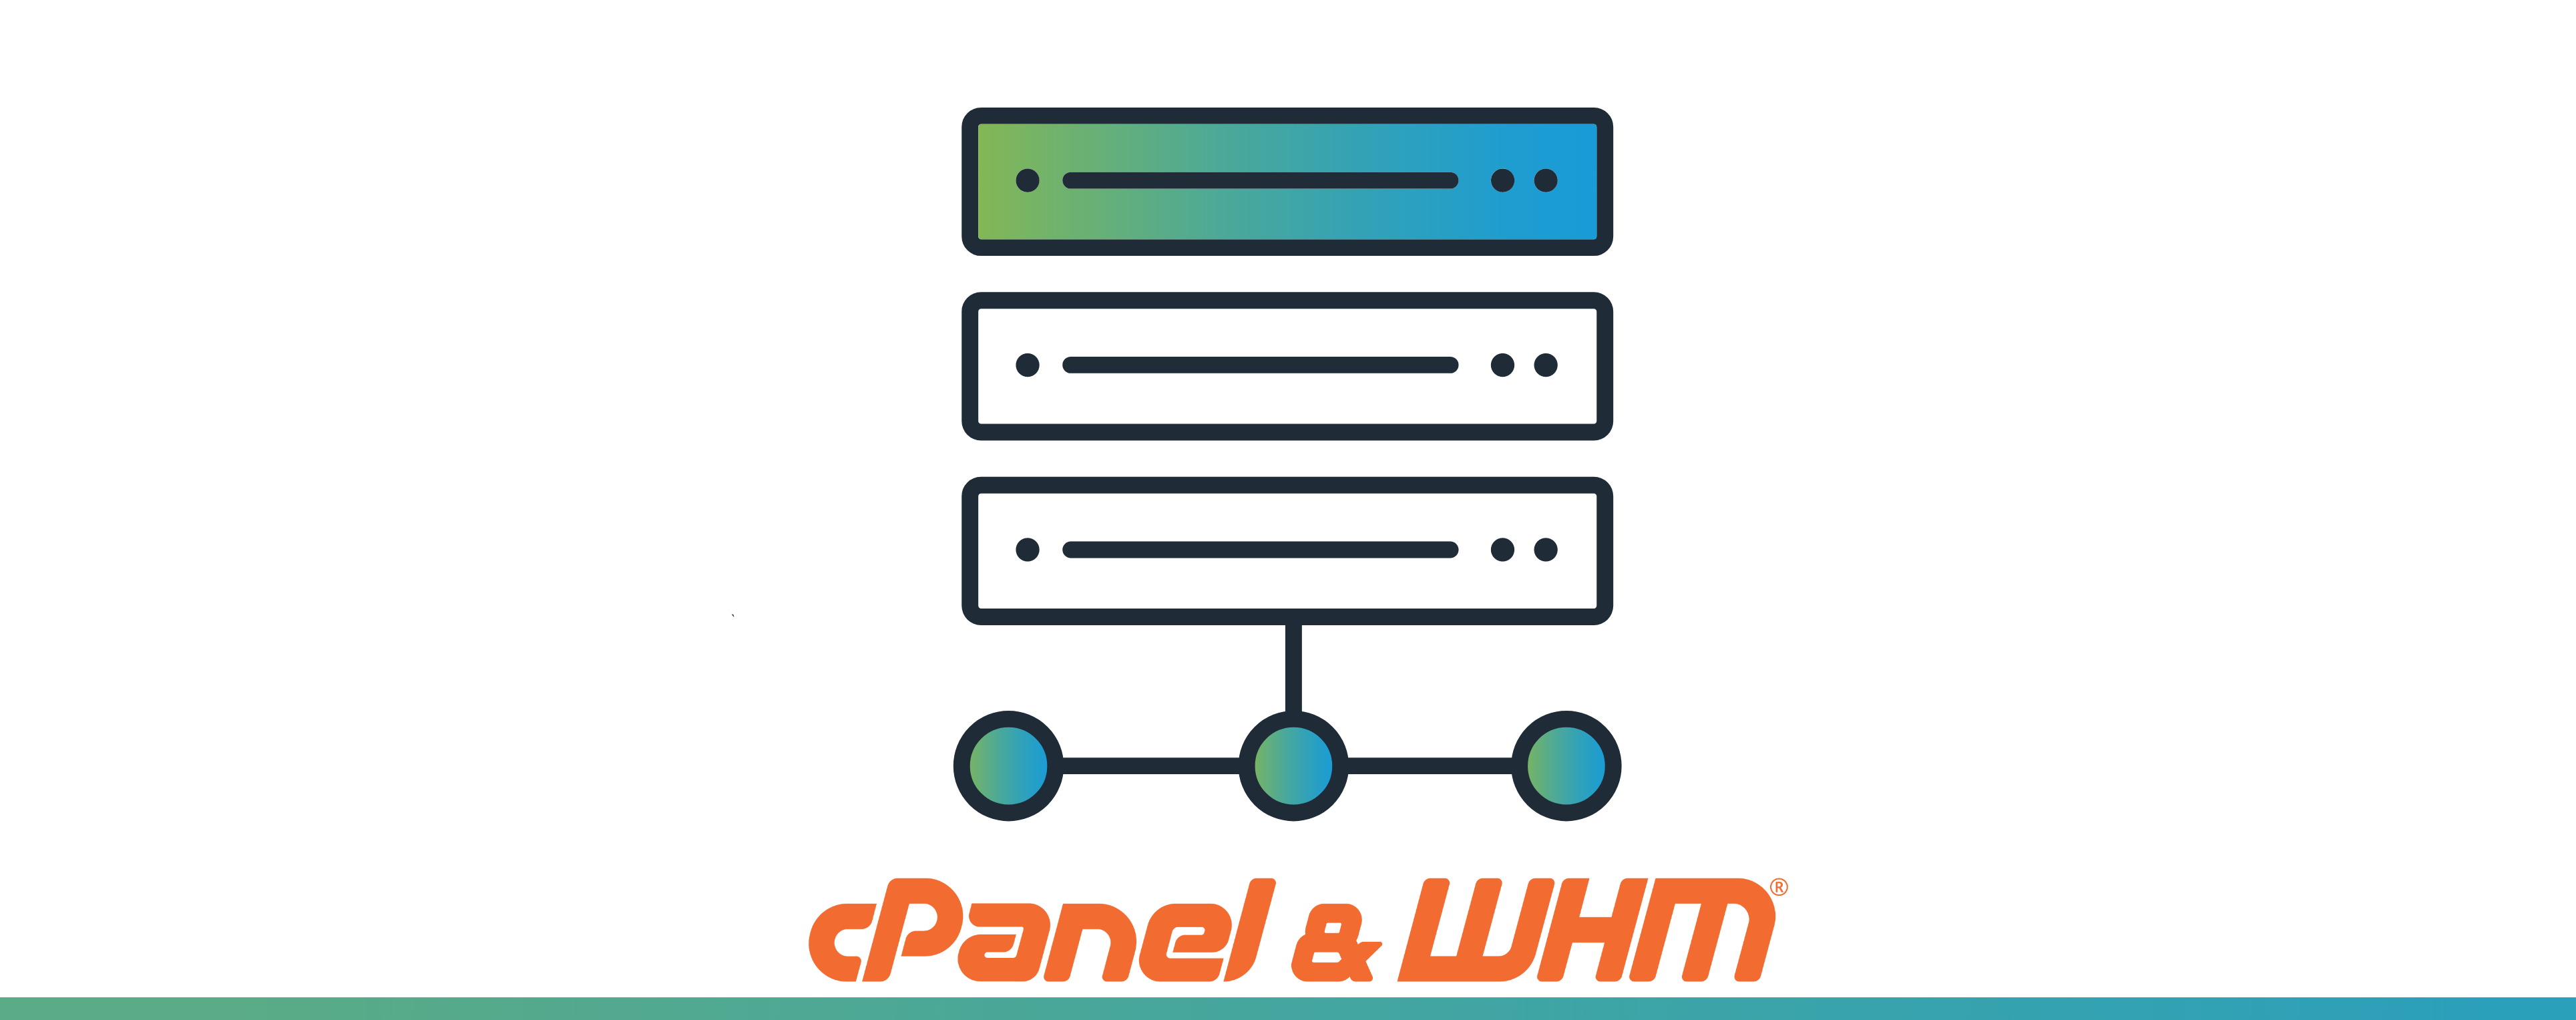 stop email service cpanel whm